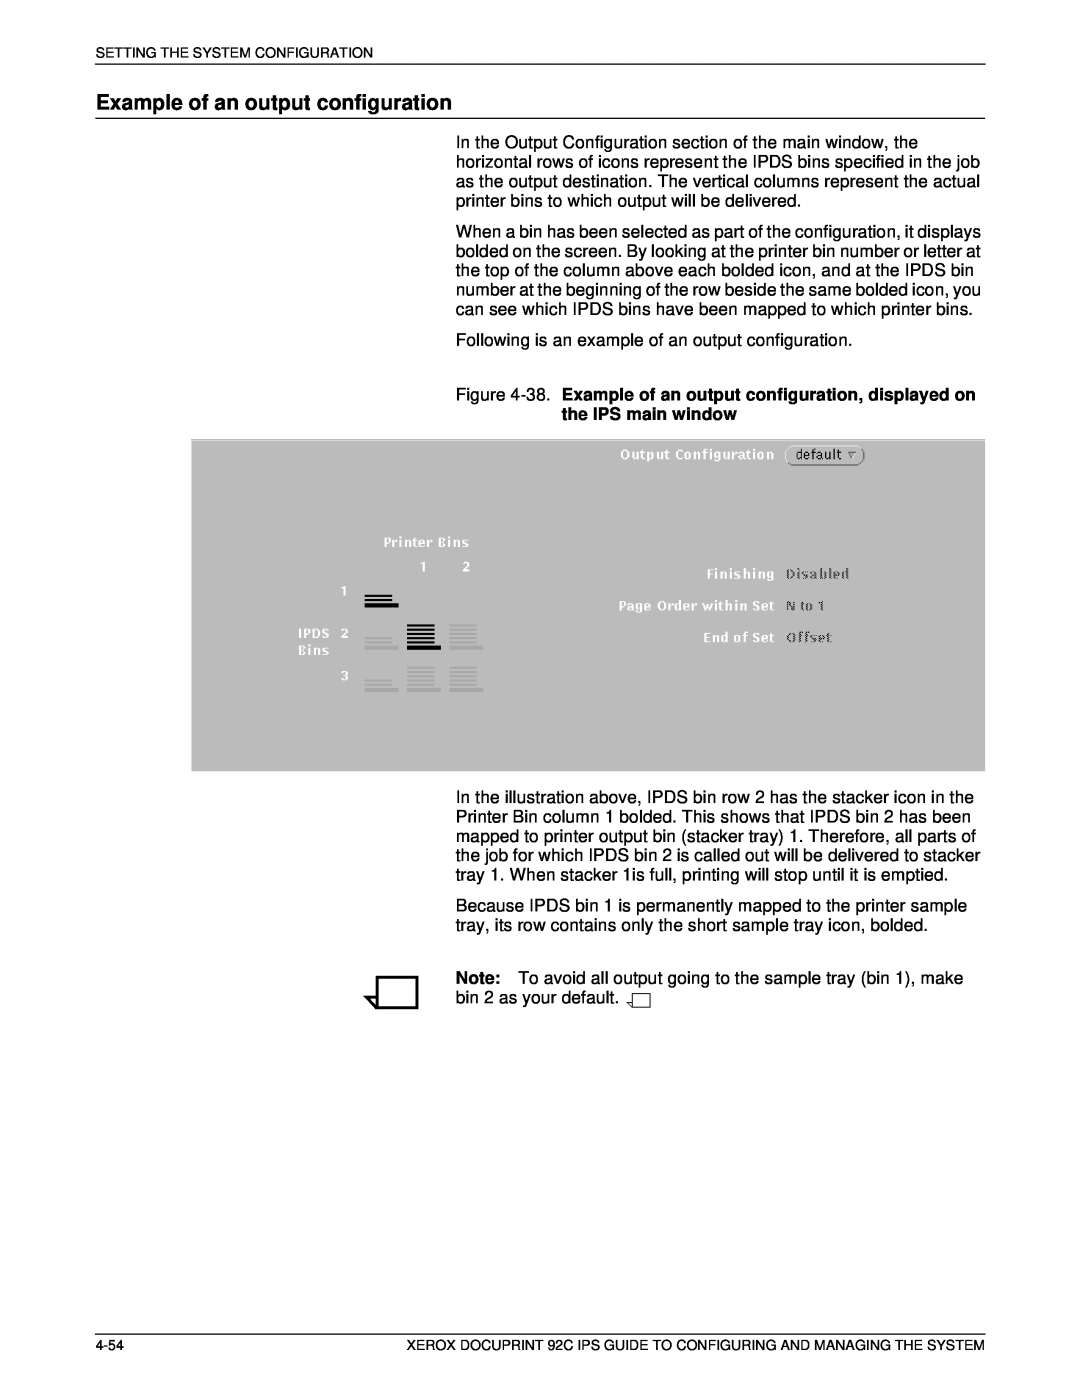 Xerox 92C IPS manual Example of an output configuration 